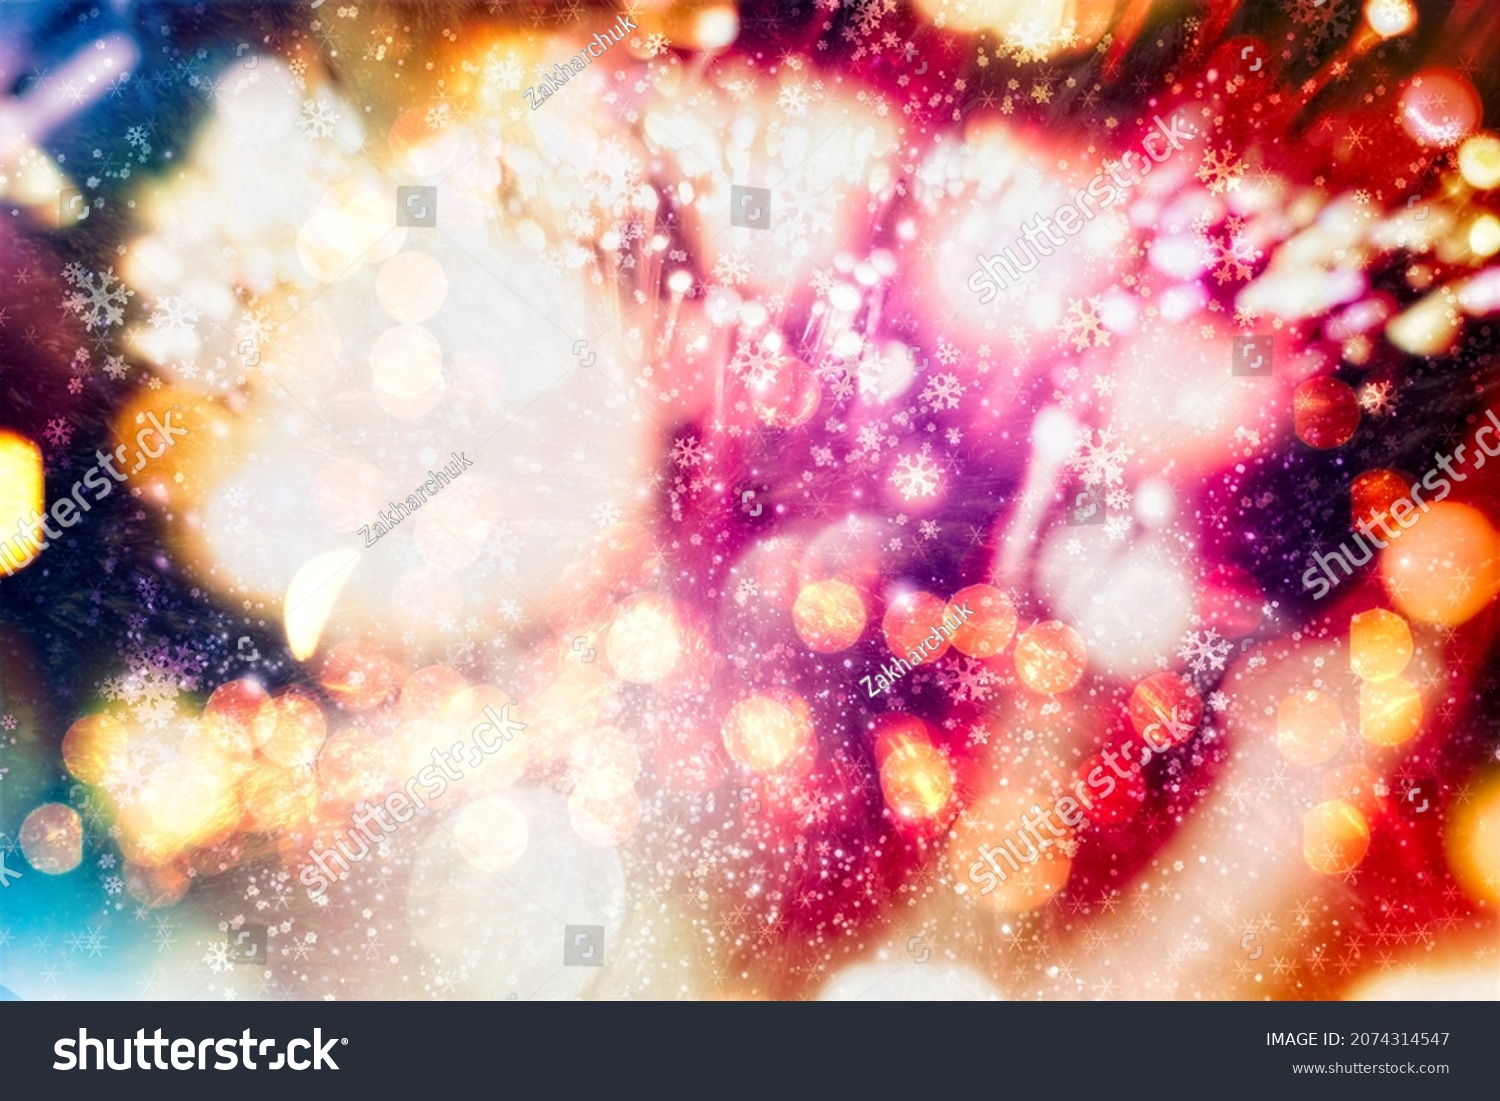 10,163,661 Abstract party Images, Stock Photos & Vectors | Shutterstock